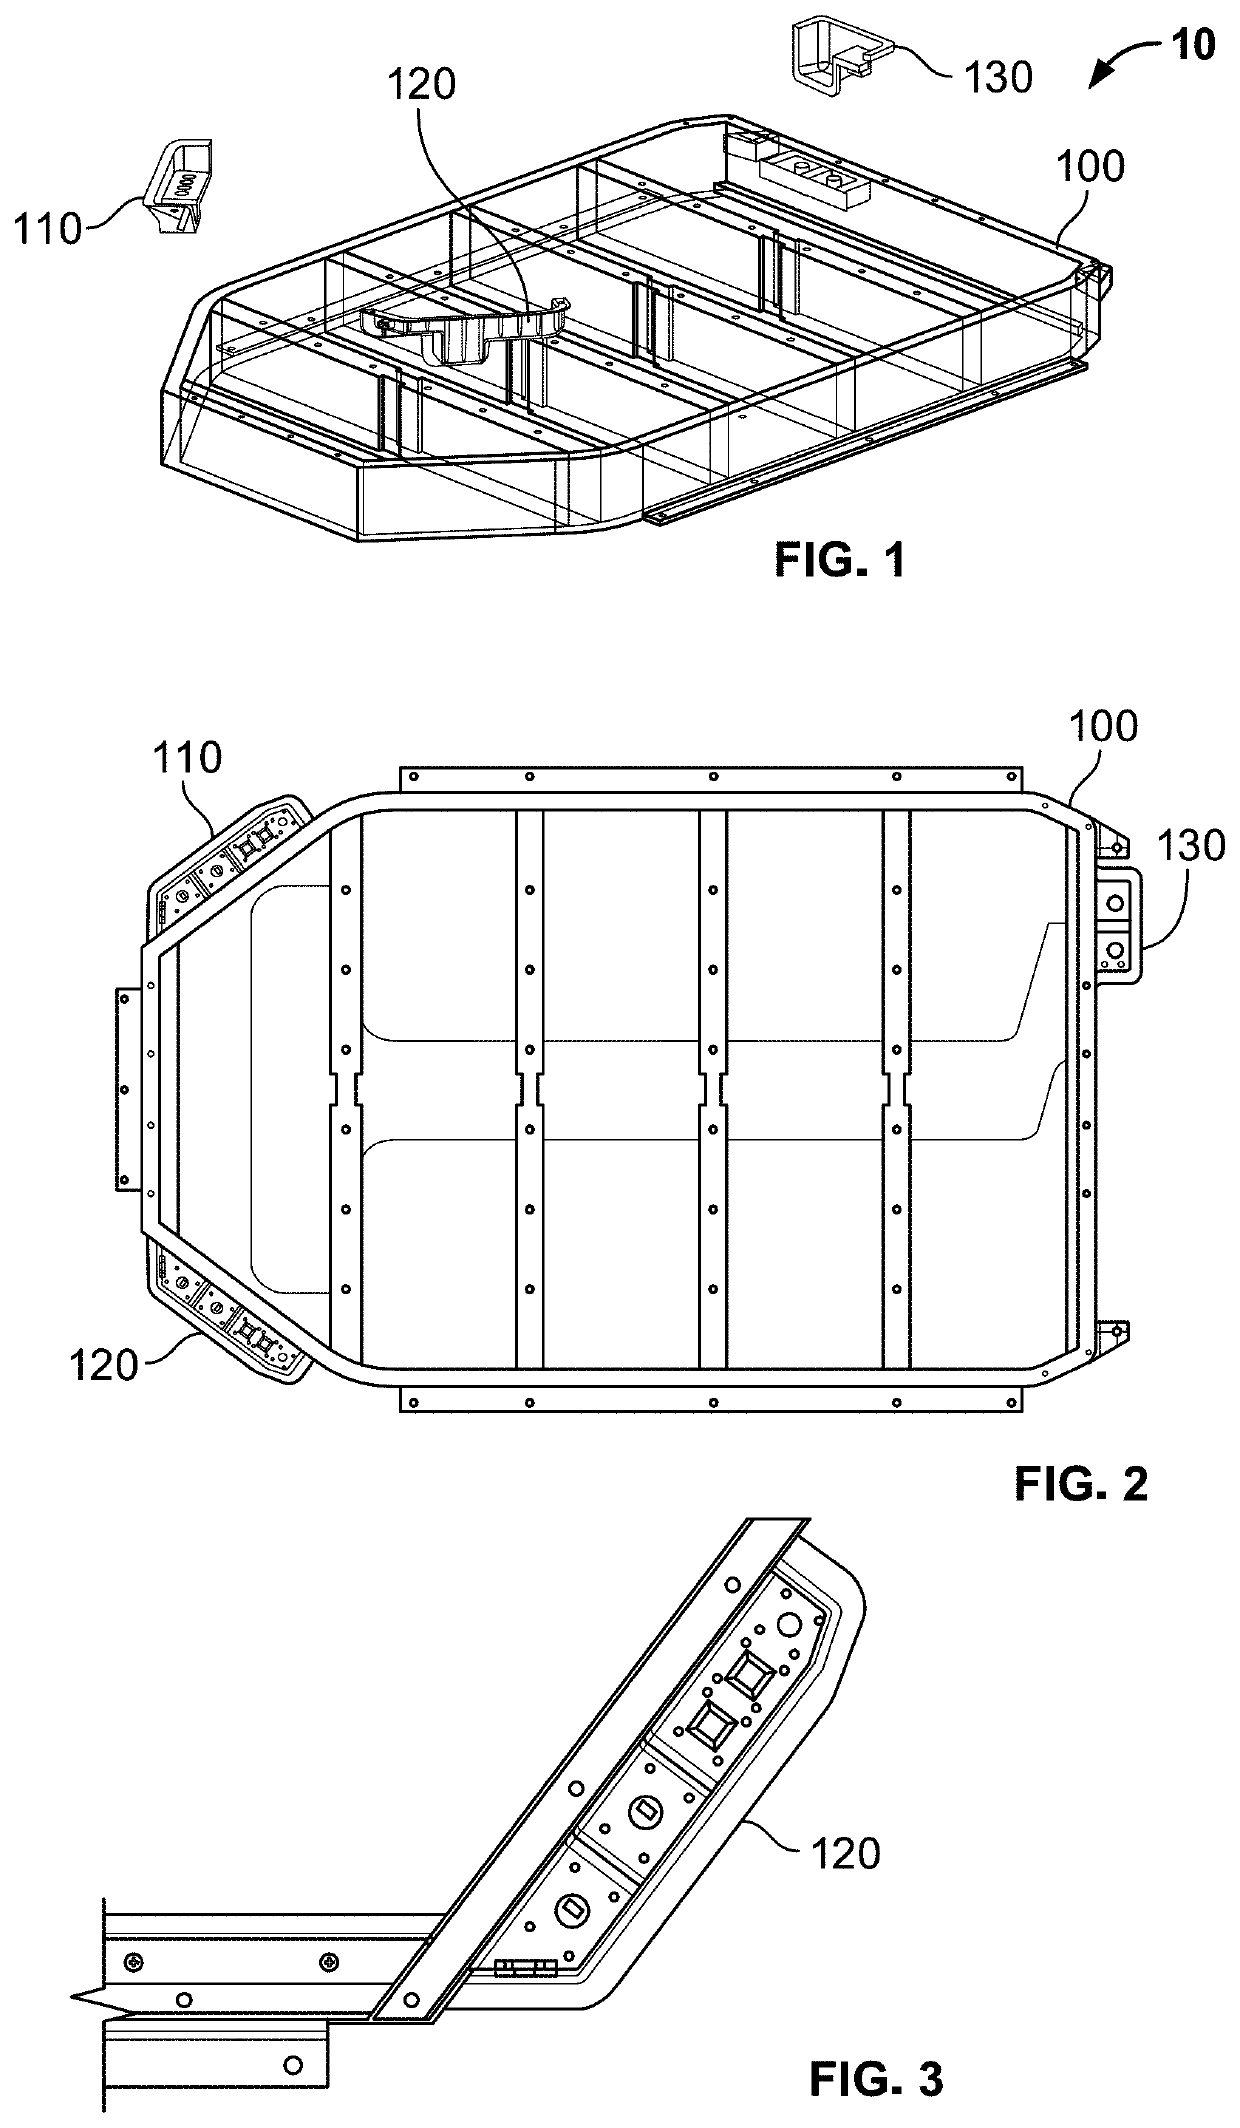 Electric vehicle battery pack having external side pouch for electrical components